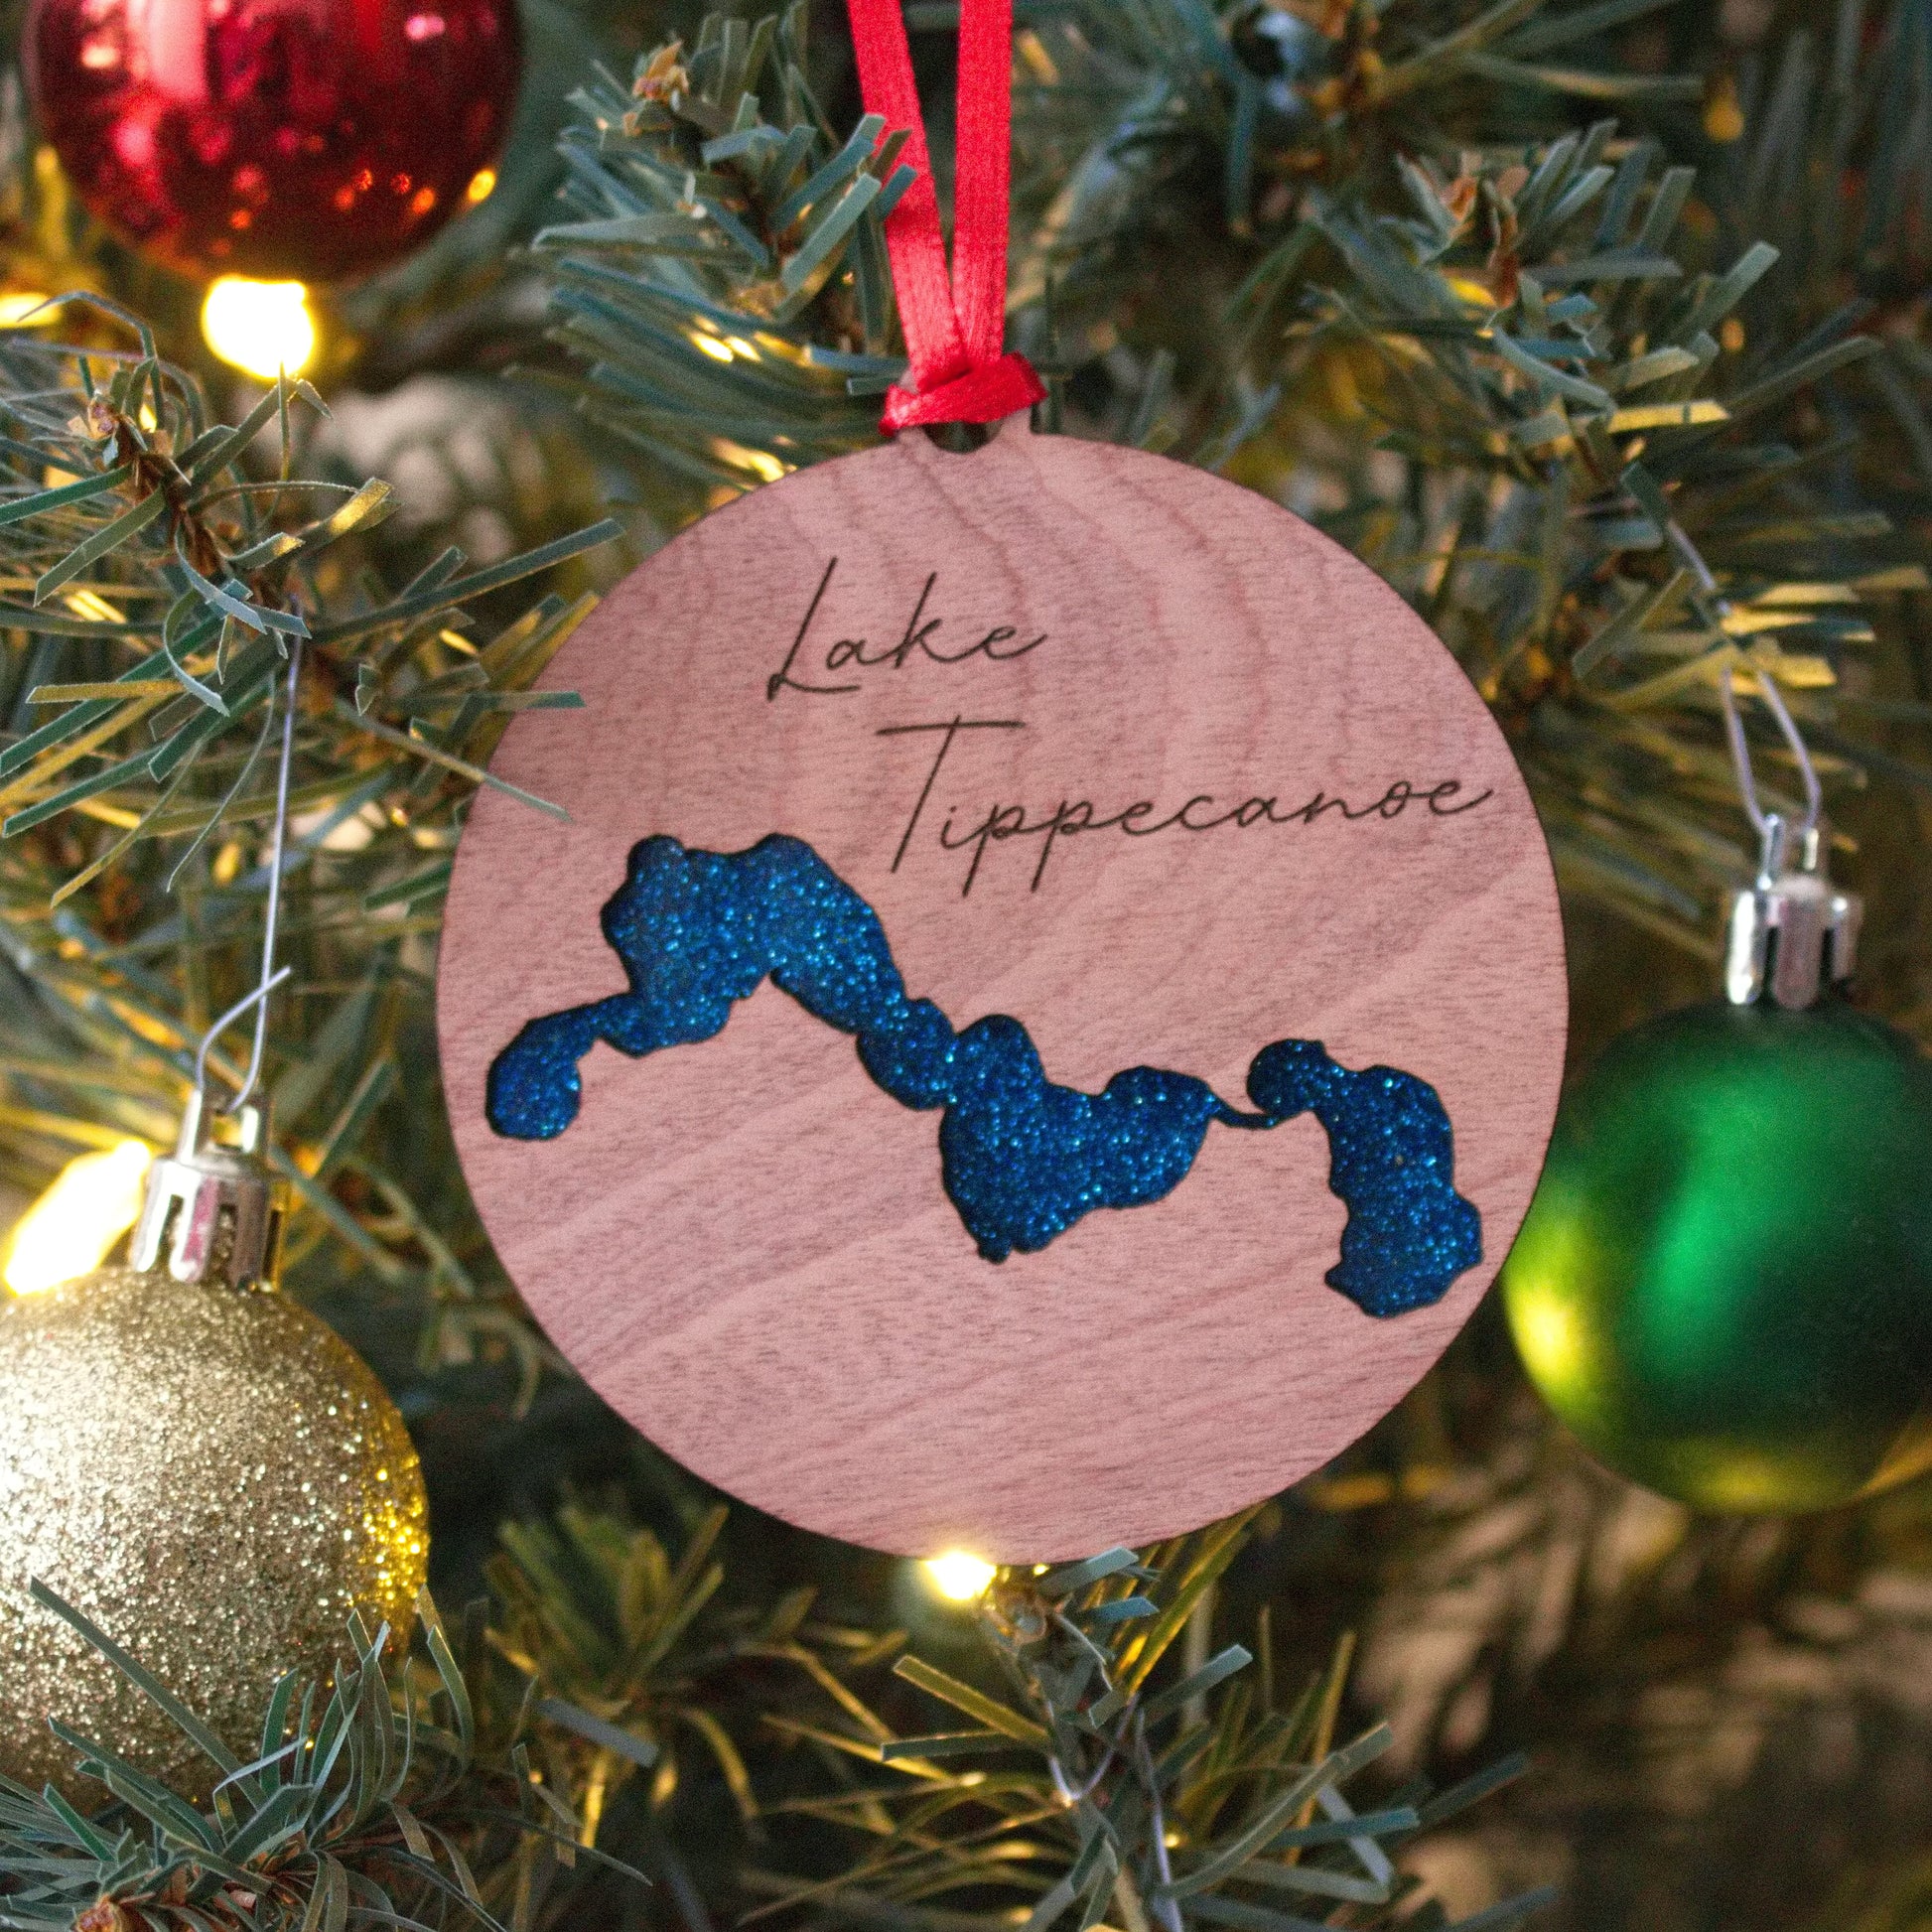 Tippecanoe Lake Christmas ornament for the family to remember time spent together on the lake. Made out of wood and acrylic with attention to detail. This is something you will love.